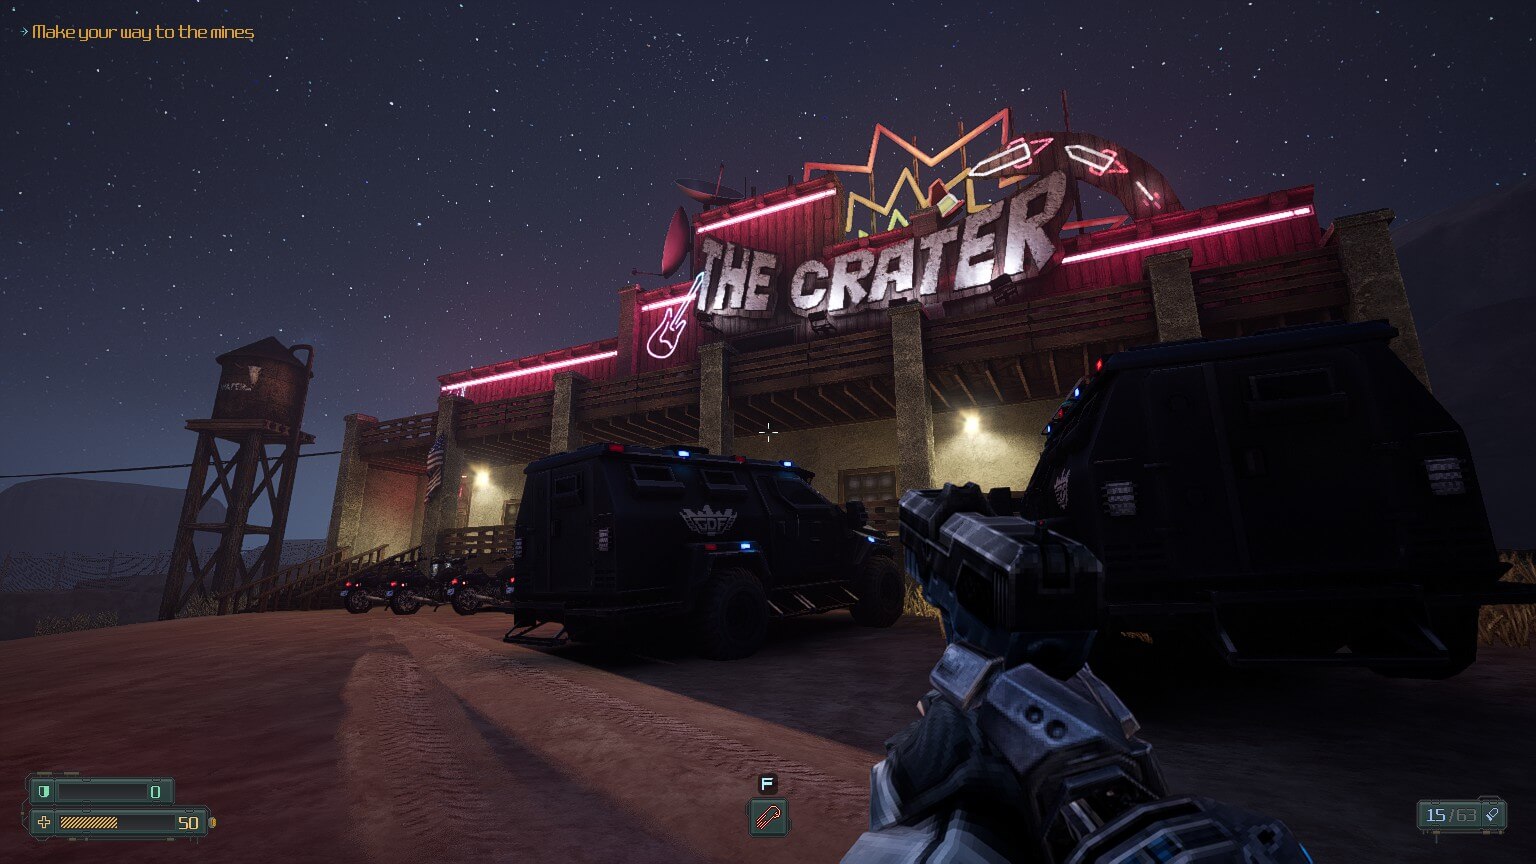 A shot of me just outside a bar in the desert called The Crater. Outside are two GDF vehicles, I also have my gun drawn as you can see my robotic hand.